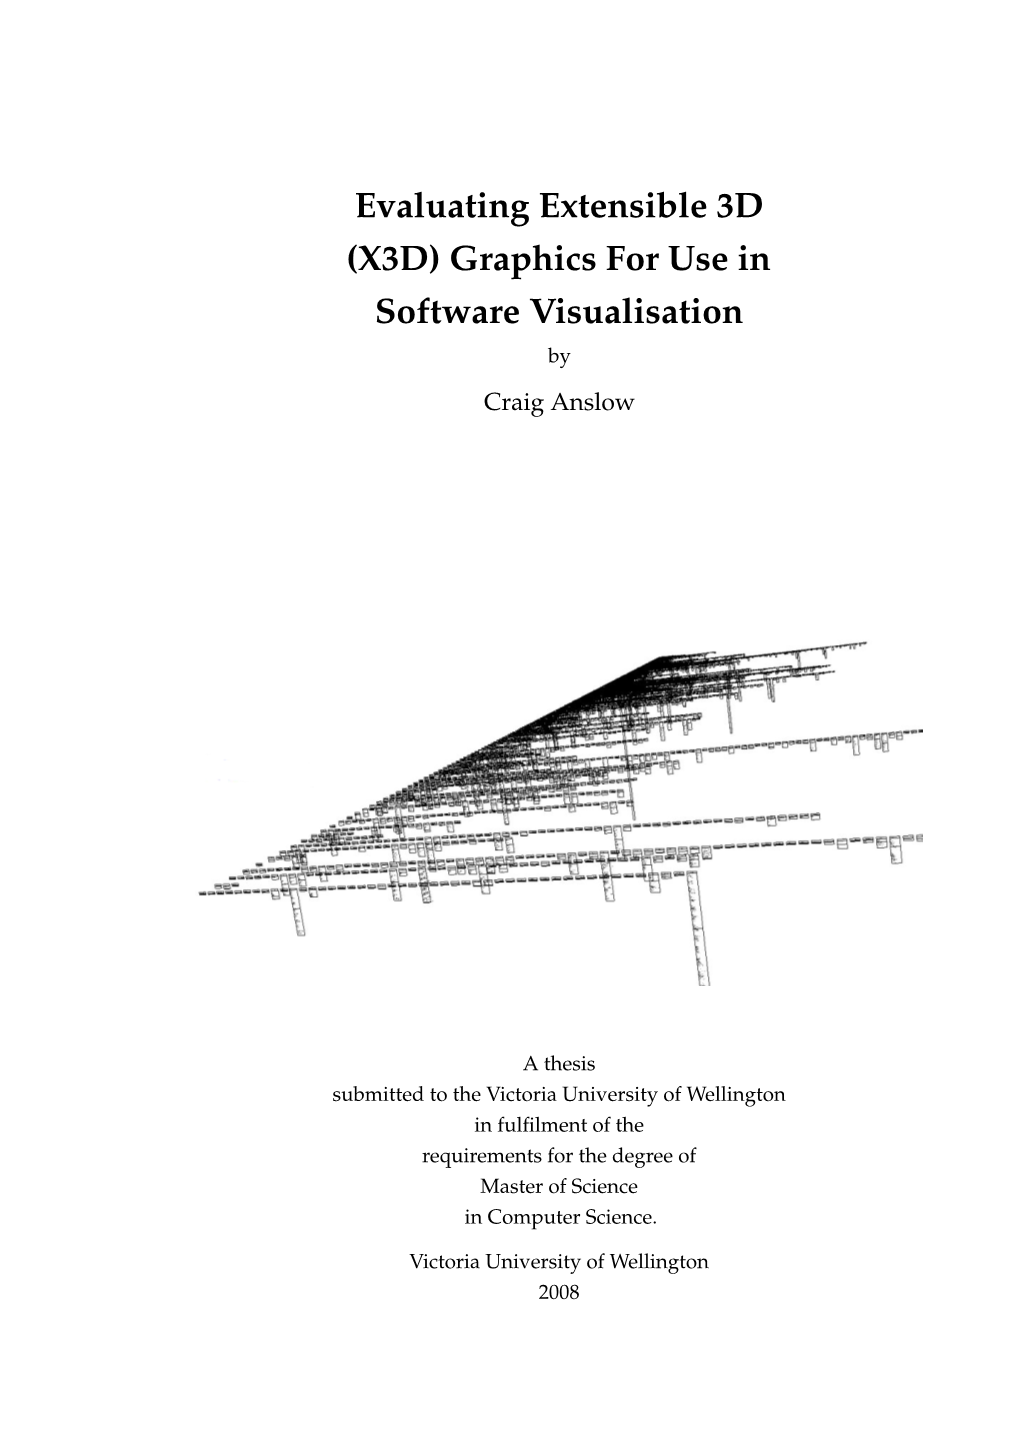 Evaluating Extensible 3D (X3D) Graphics for Use in Software Visualisation by Craig Anslow